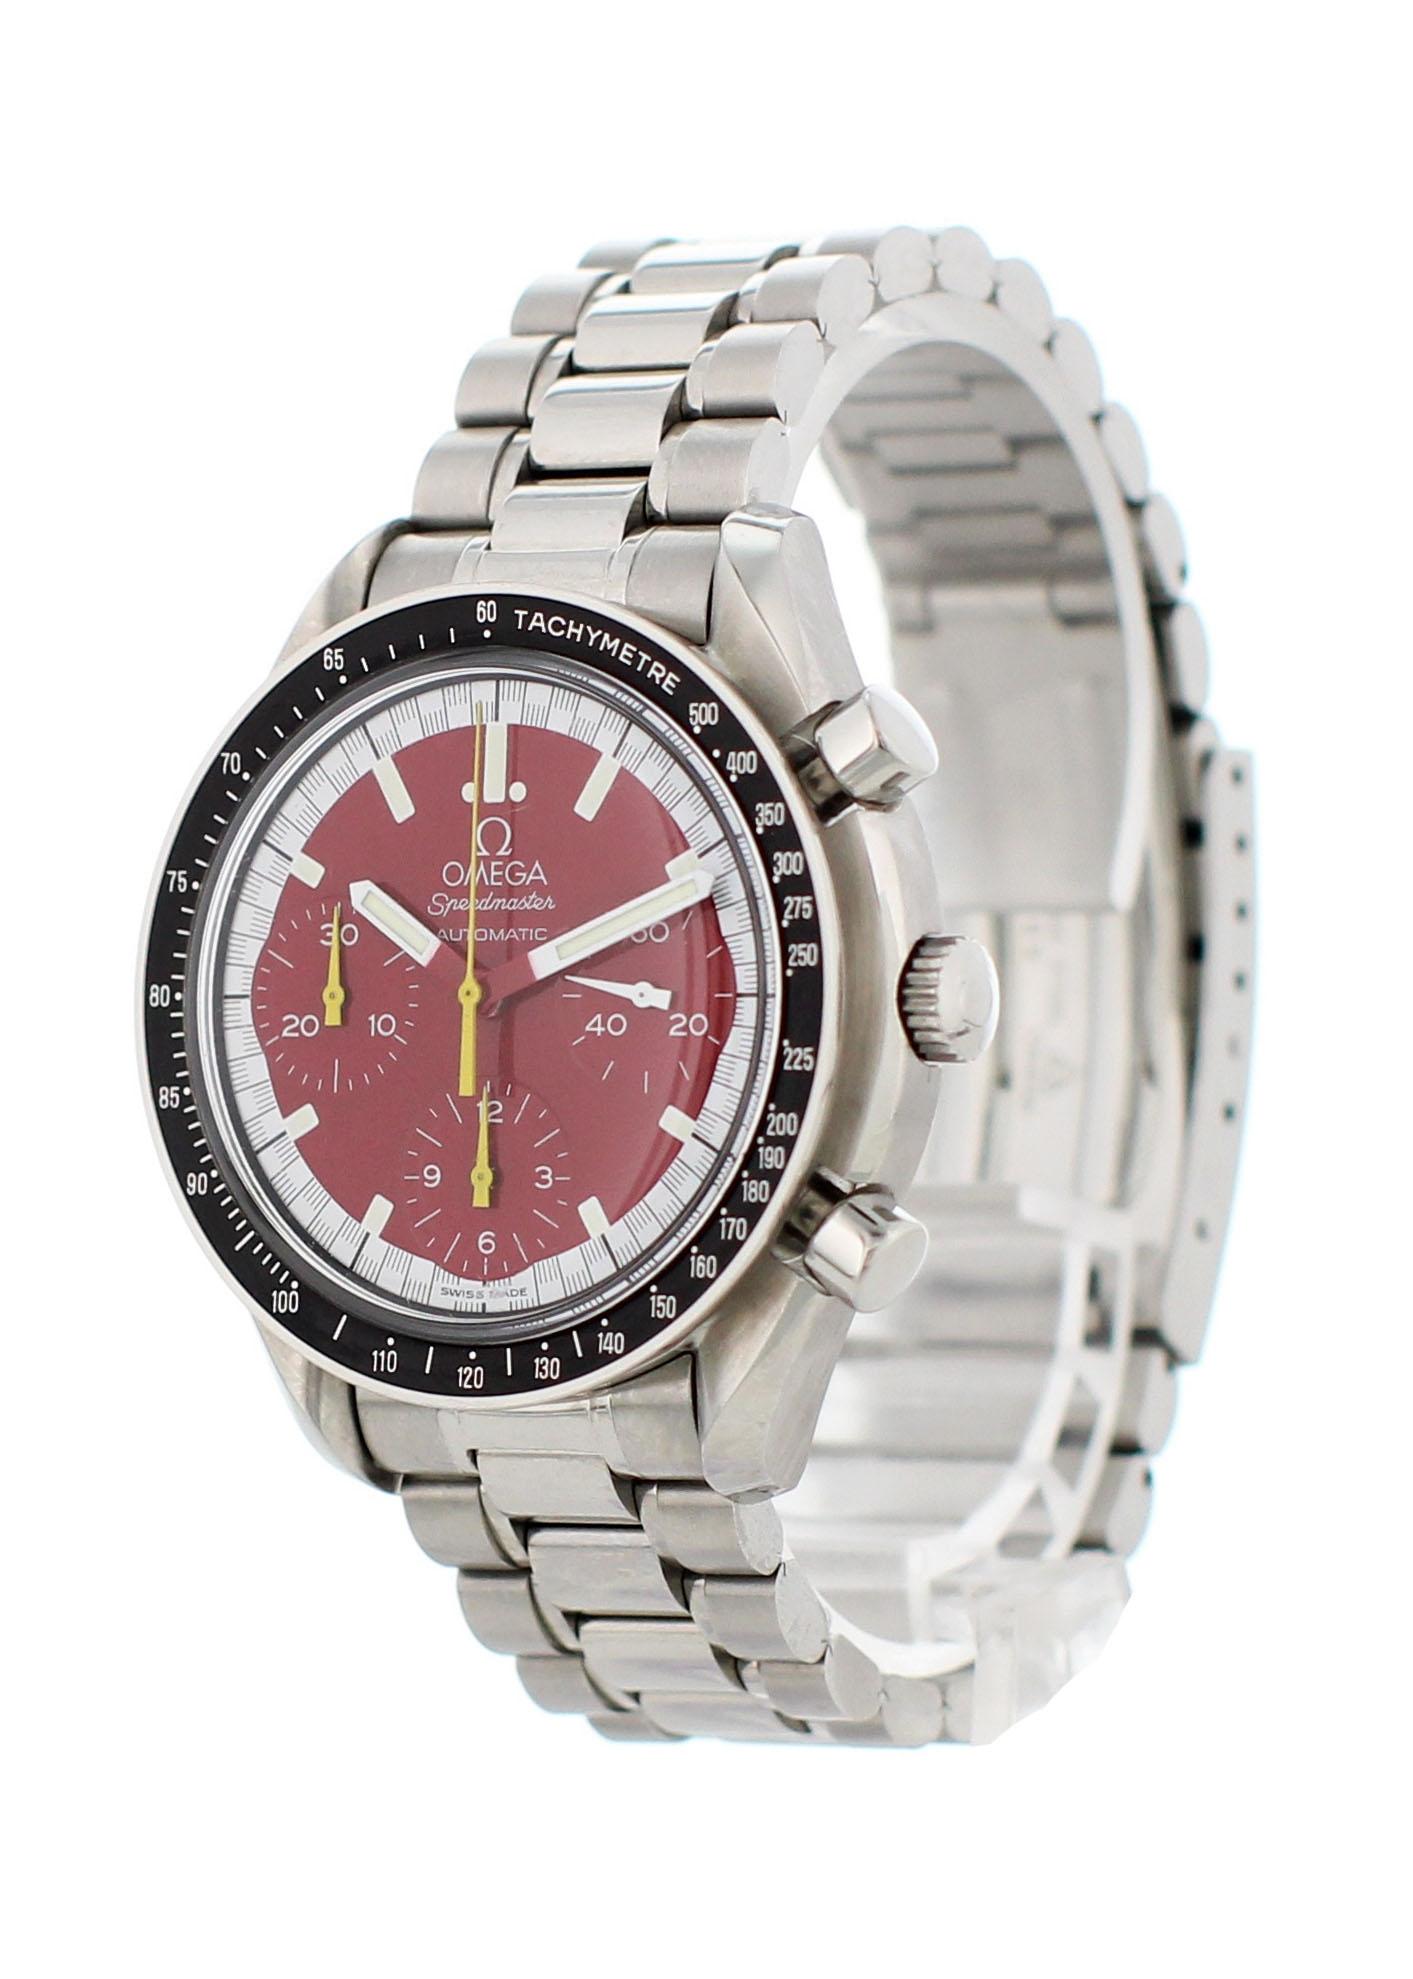 Omega Speedmaster Michael Schumacher limited edition 3510.61.00 Mens Watch. 39mm stainless steel case with tachymeter bezel. Red dial with Luminous hands and indexes. Three chronograph sub-dials displaying seconds, minutes, and hours. White racing